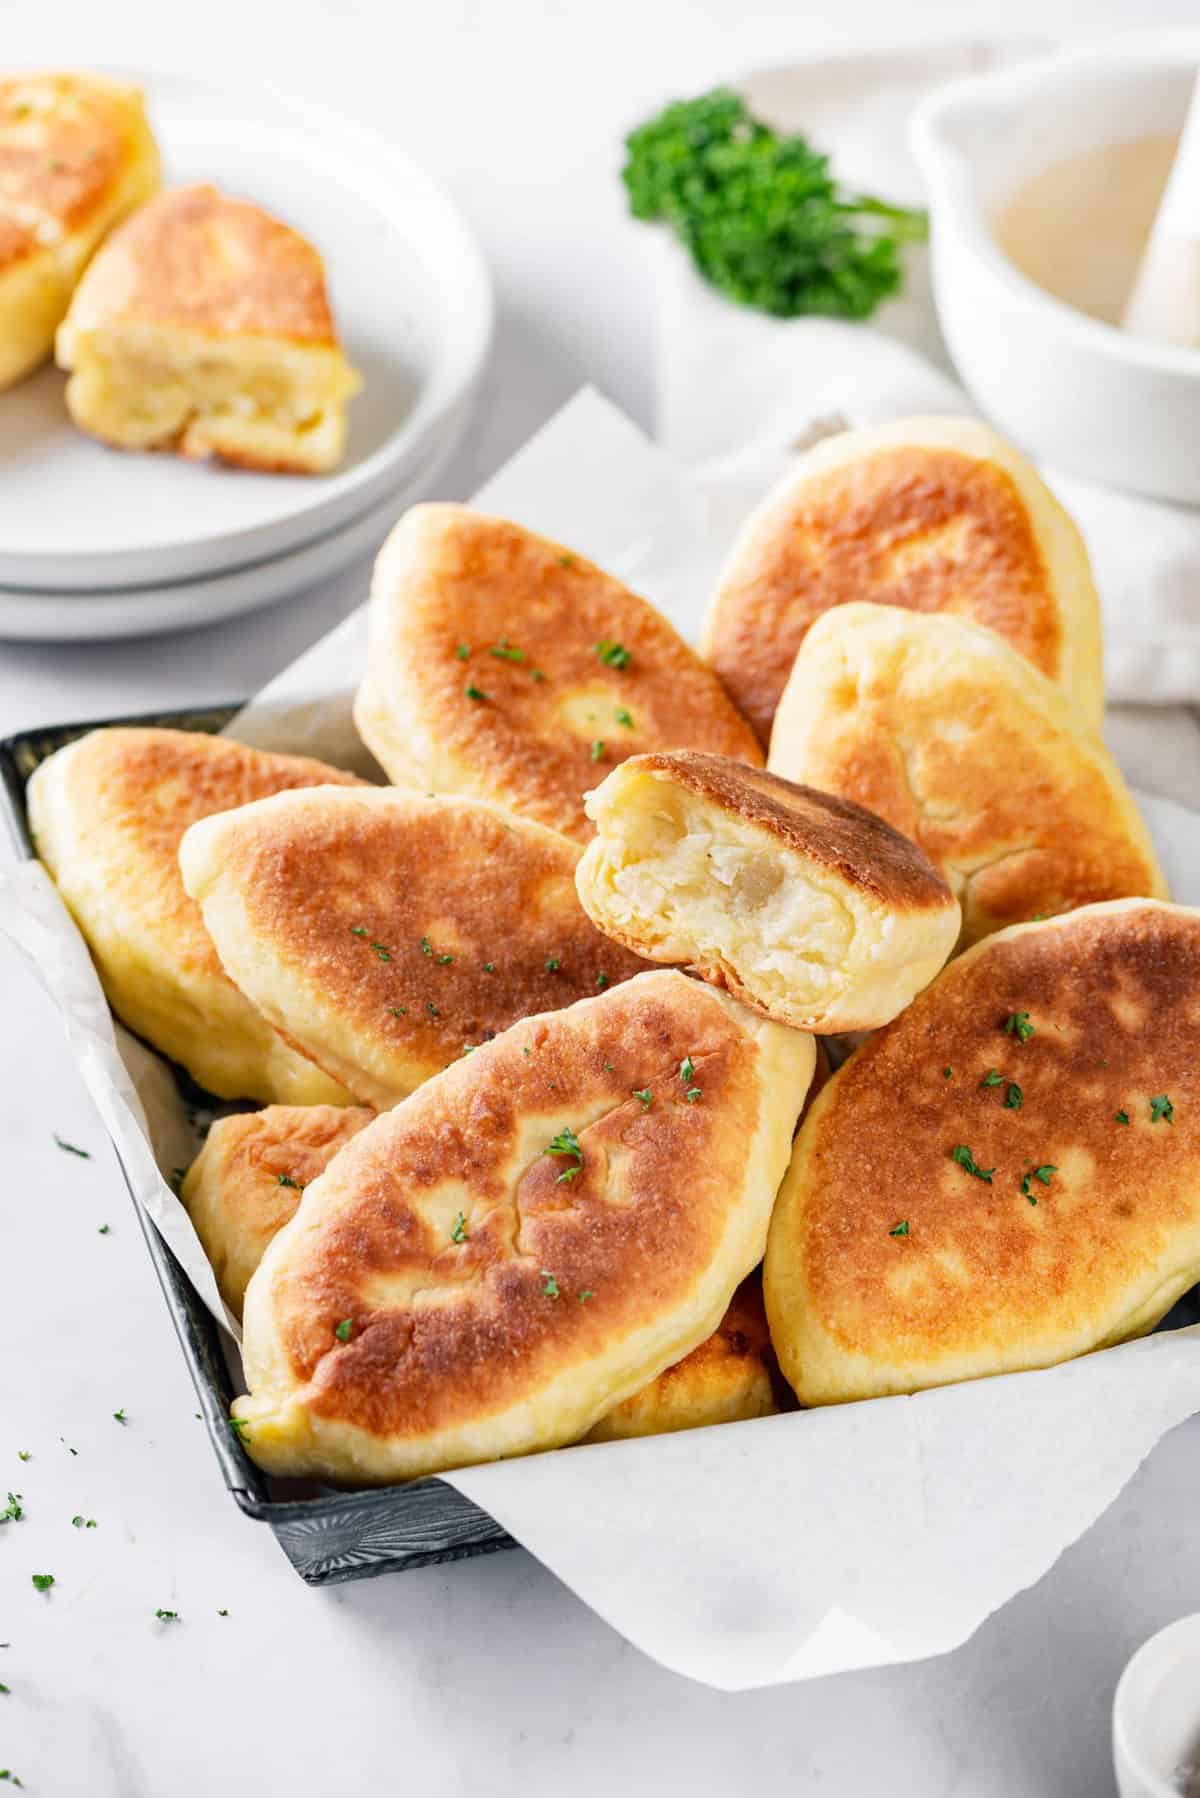 A close-up view of a tray full of easy piroshki or pirozhki with mashed potato filling.